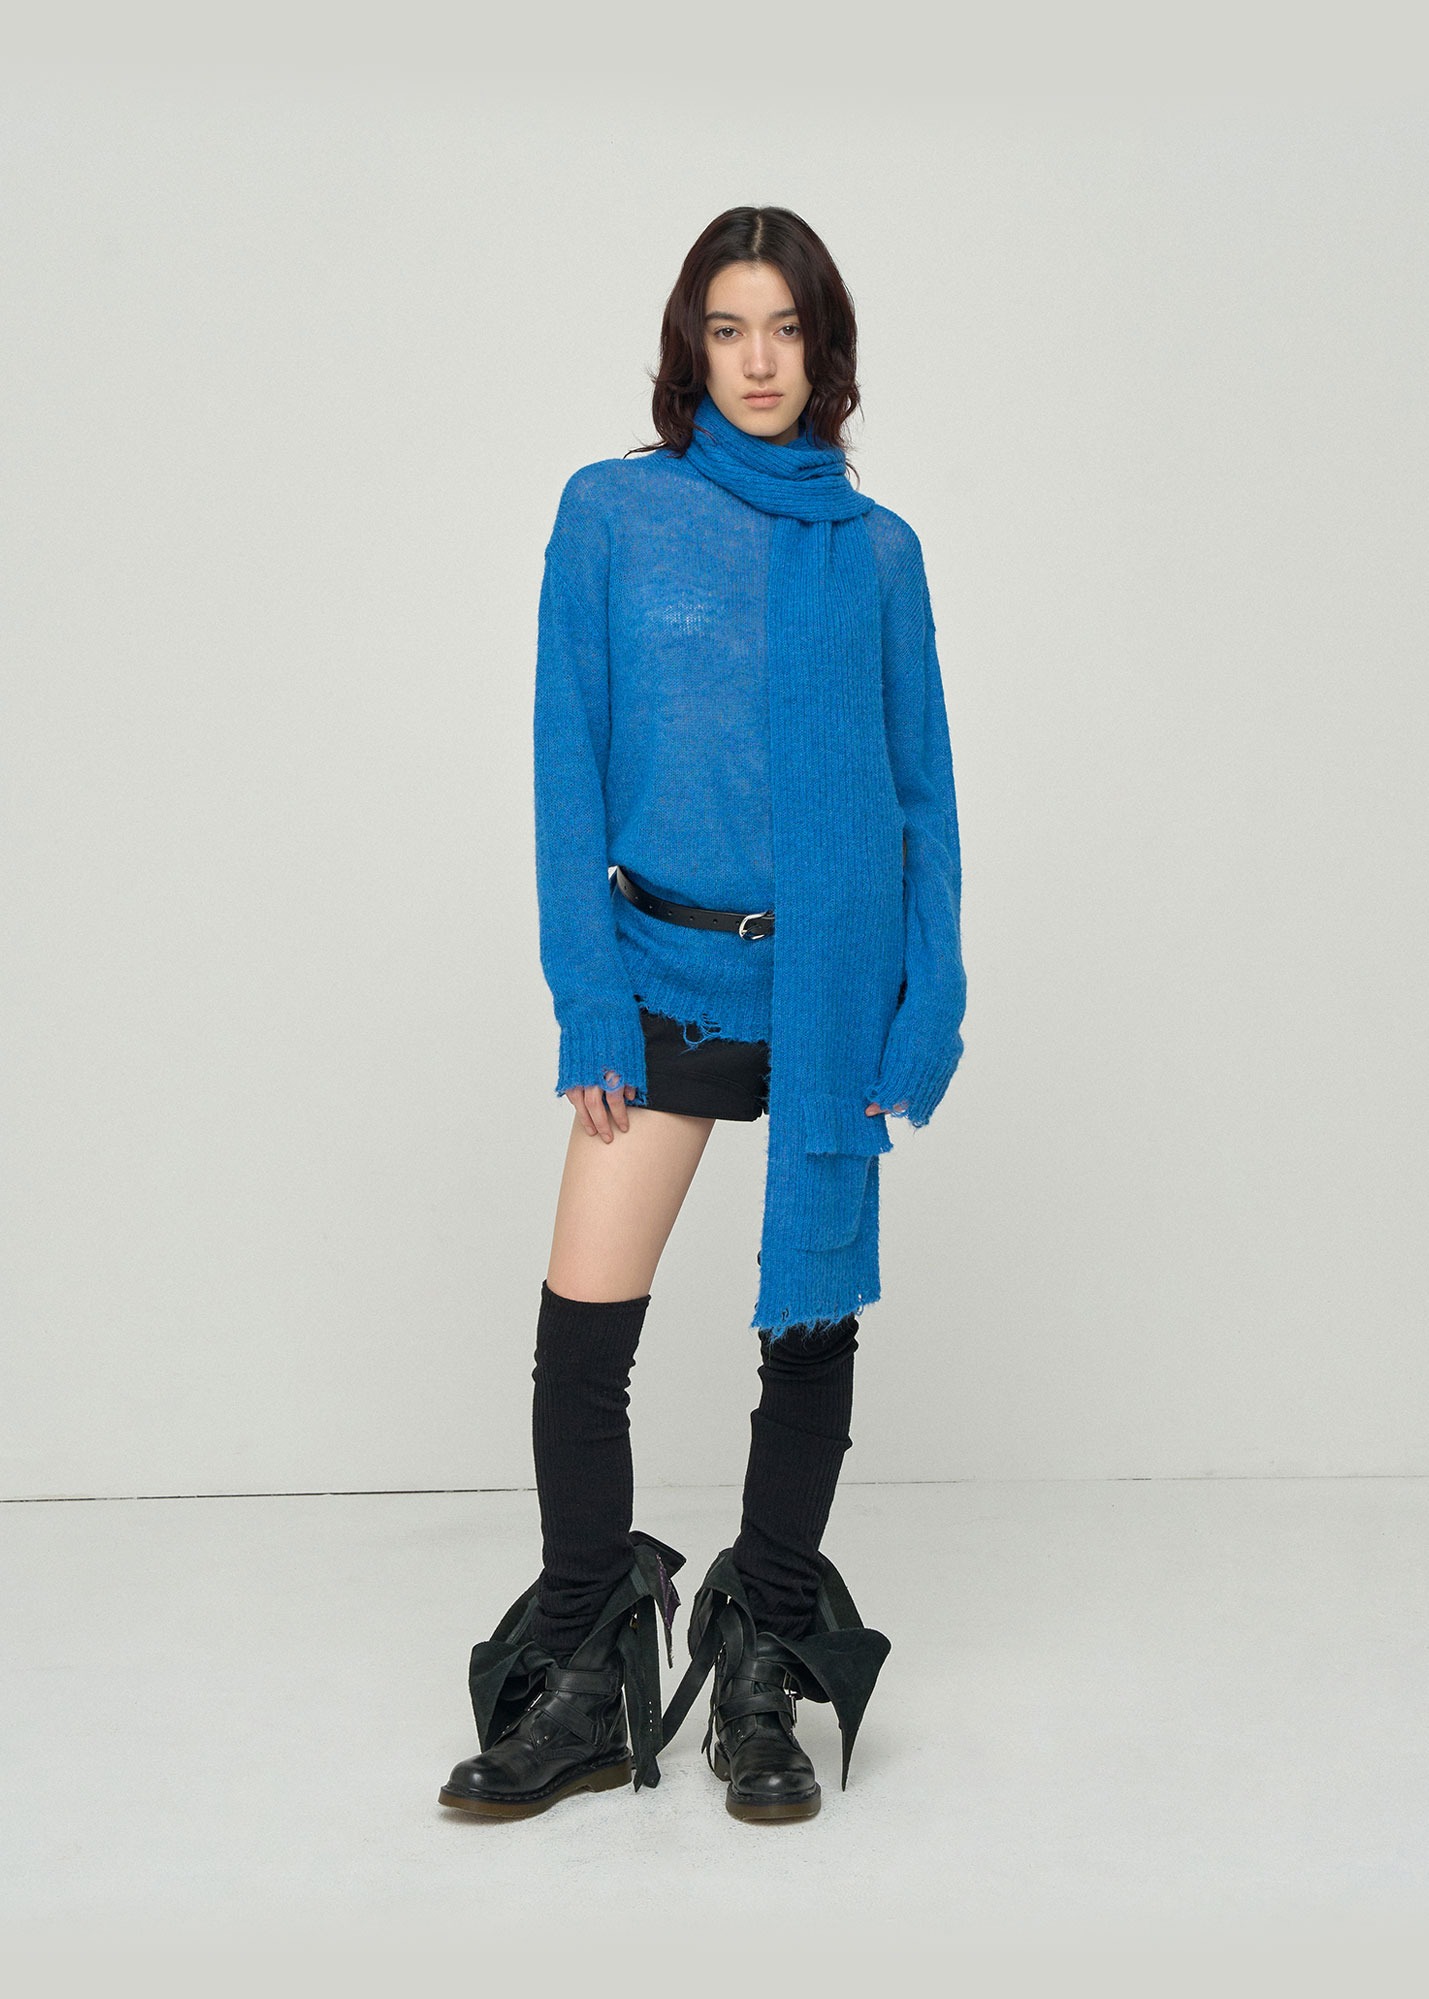 SEMI-SHEER DISTRESSED SWEATER WITH NECK WEAR BLUE